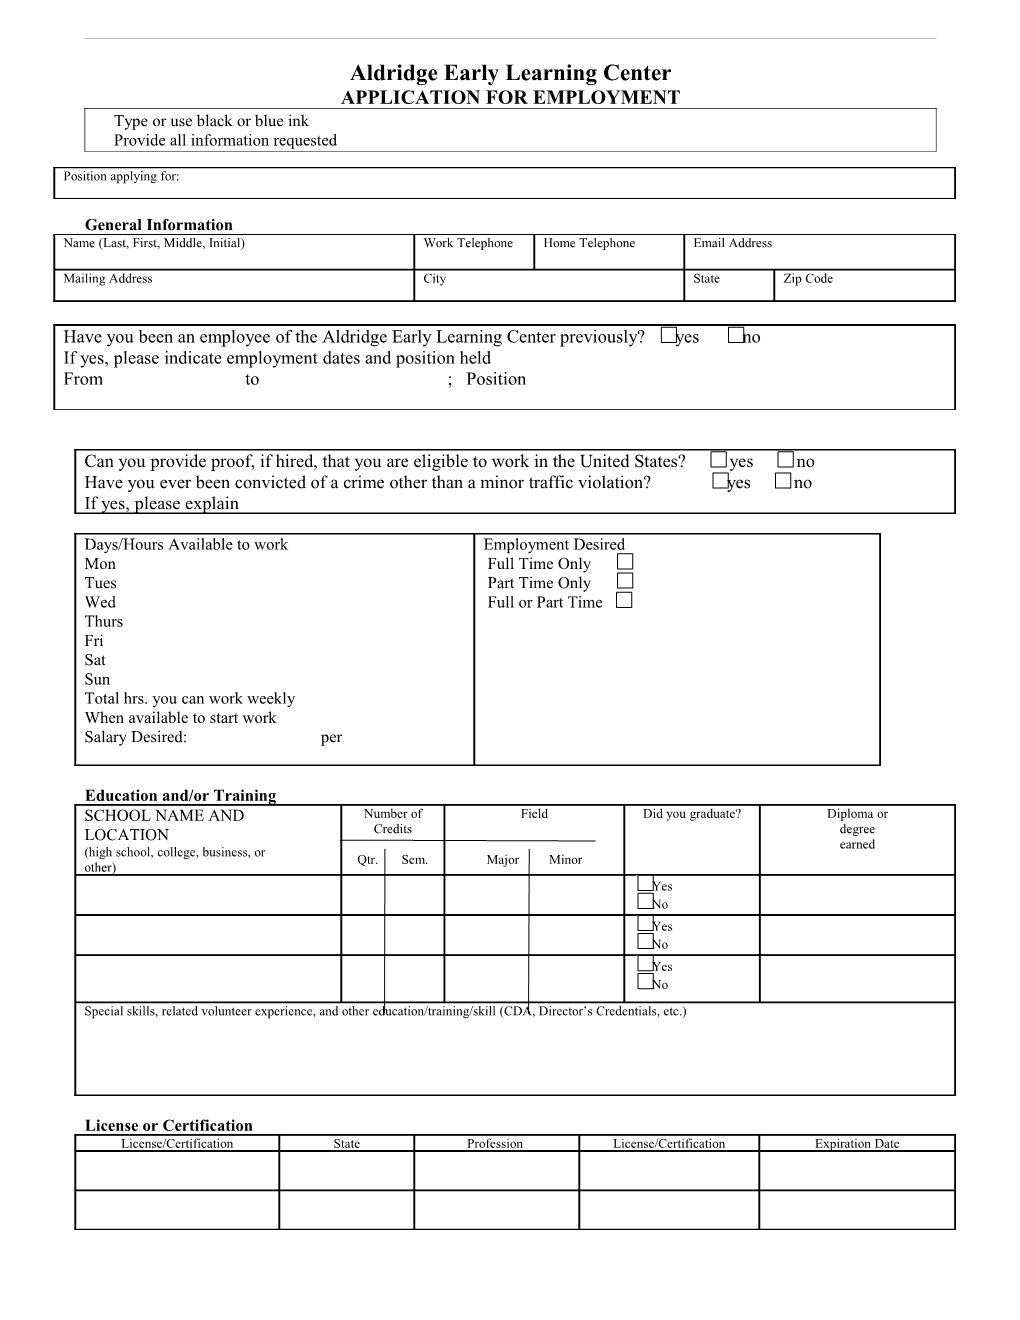 Application for Employment s80